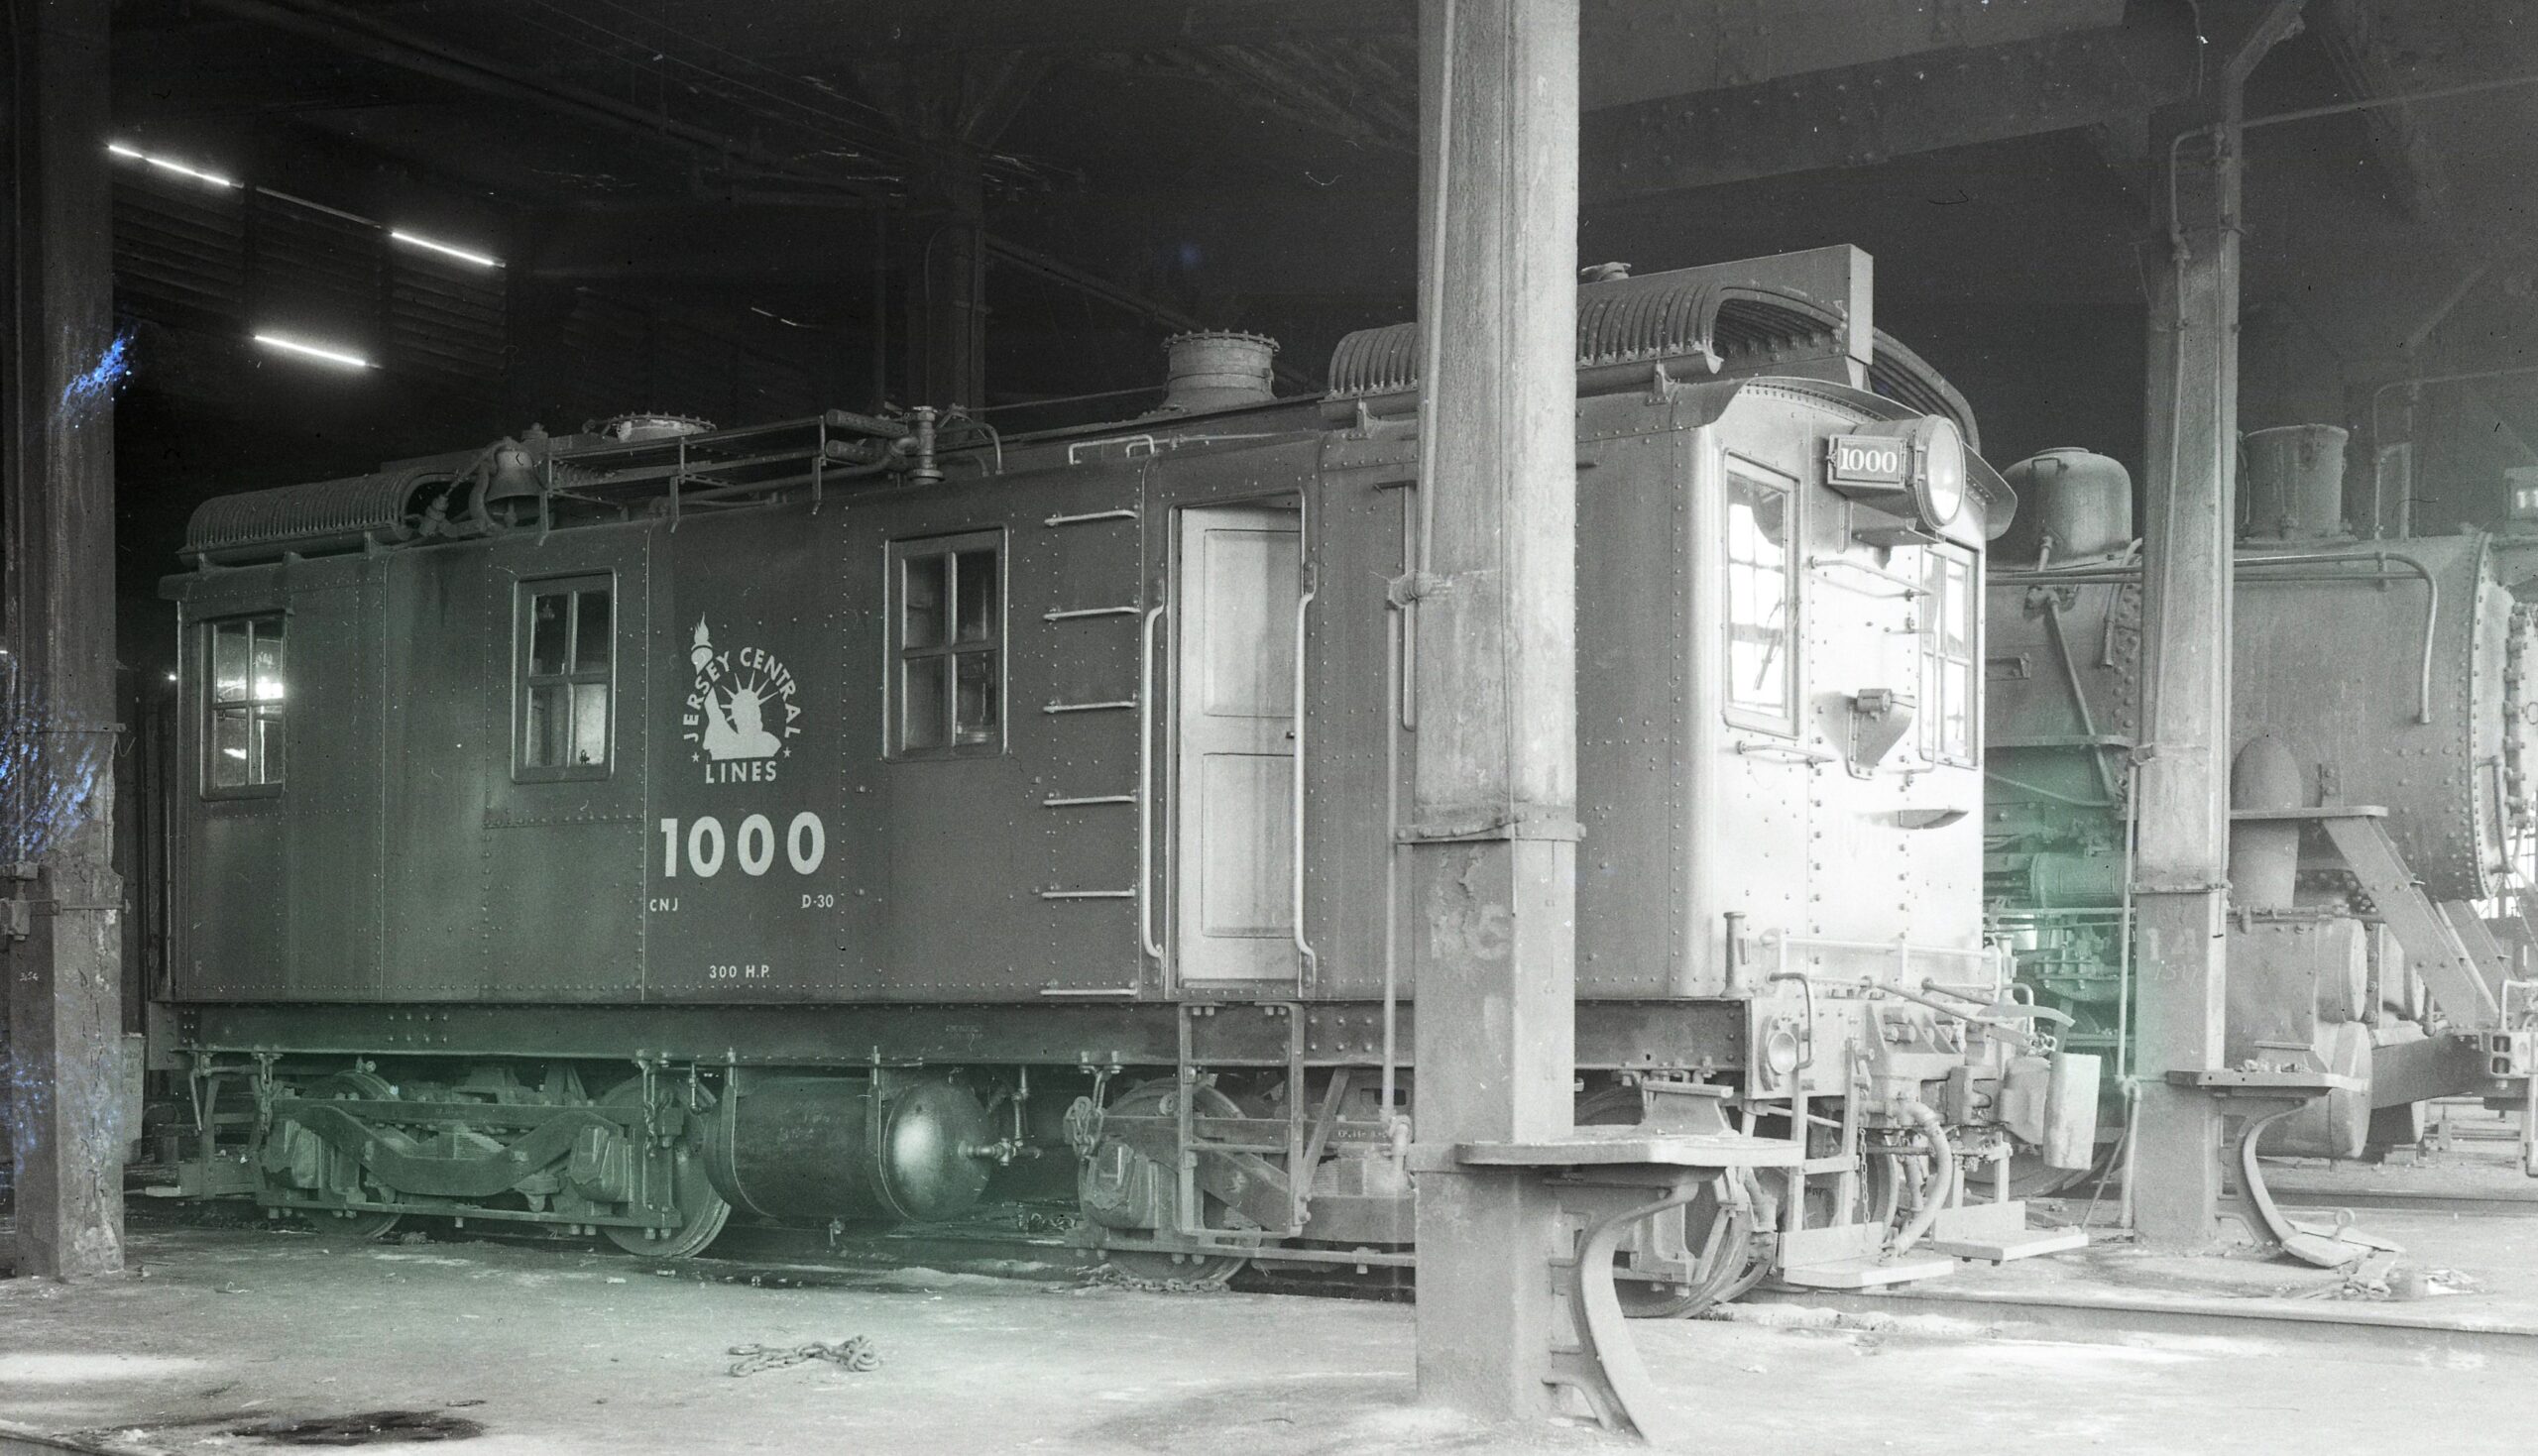 De lucht voor mij winter Central Railroad of New Jersey | Jersey City, NJ | IR-GE-ALCO #1000 |  Communipaw Roundhouse | March 20, 1954 | RL Long photo | National Railway  Historical Society, Inc.